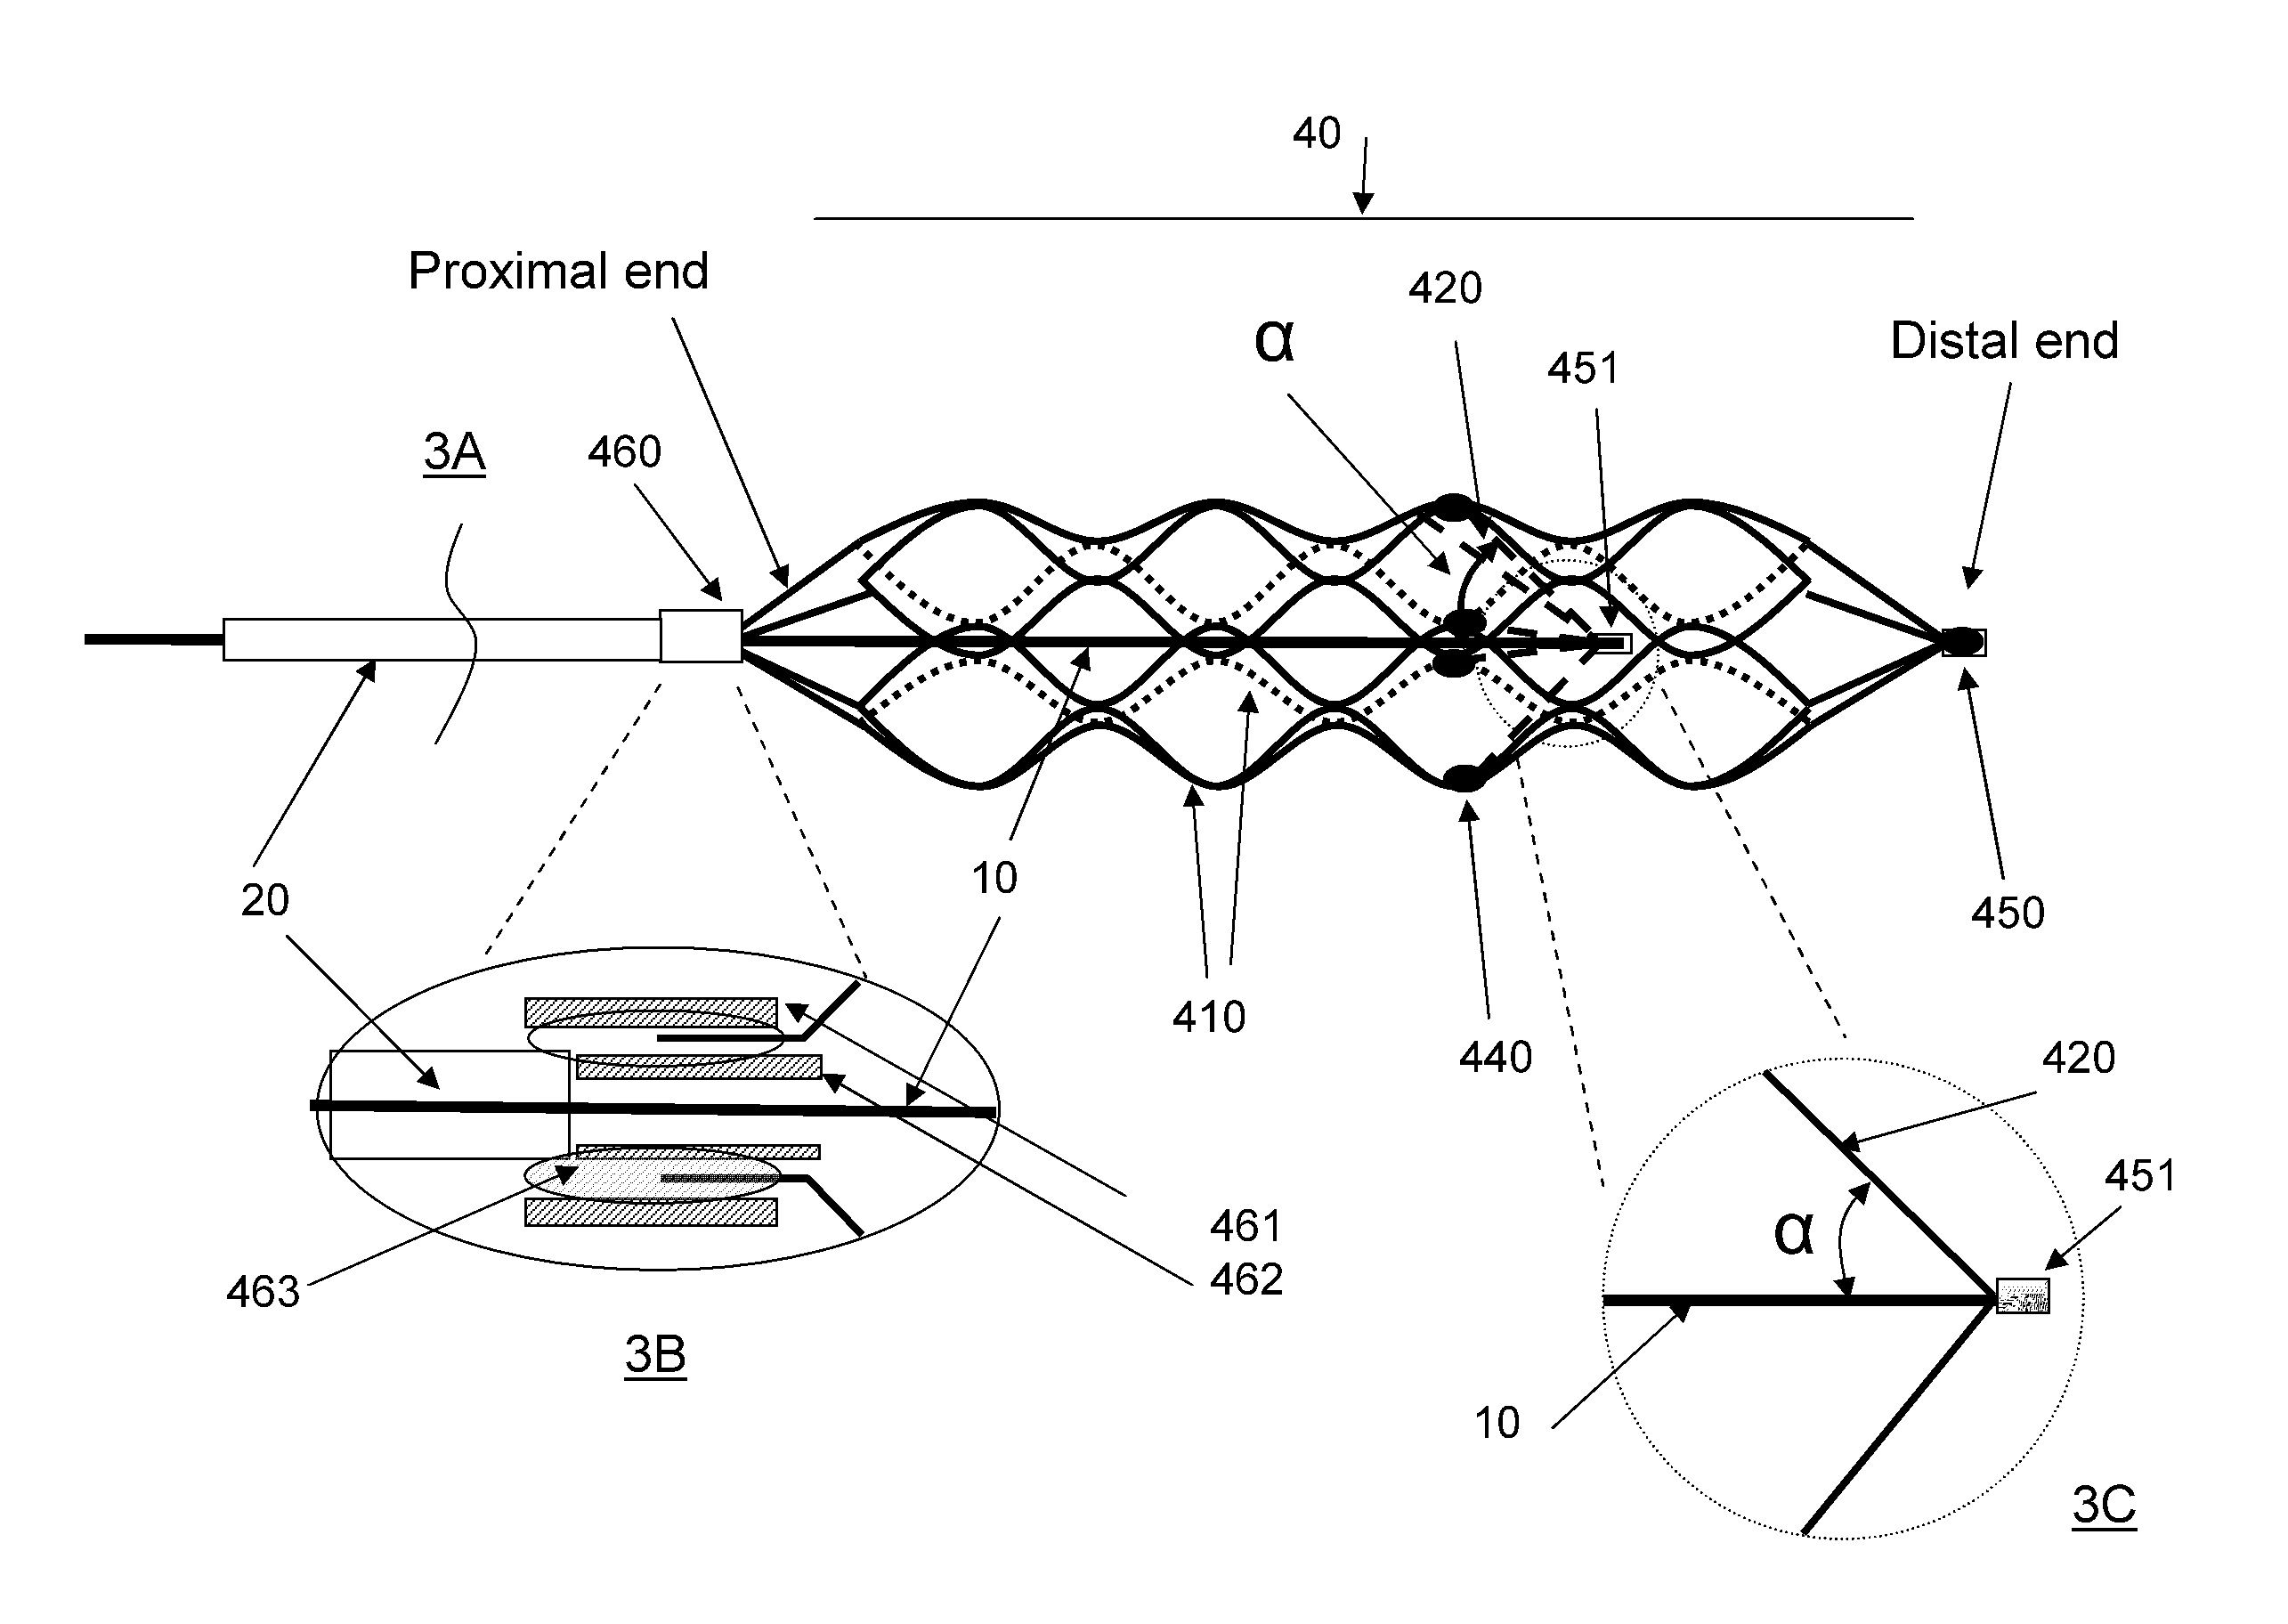 Intravascular thromboembolectomy device and method using the same